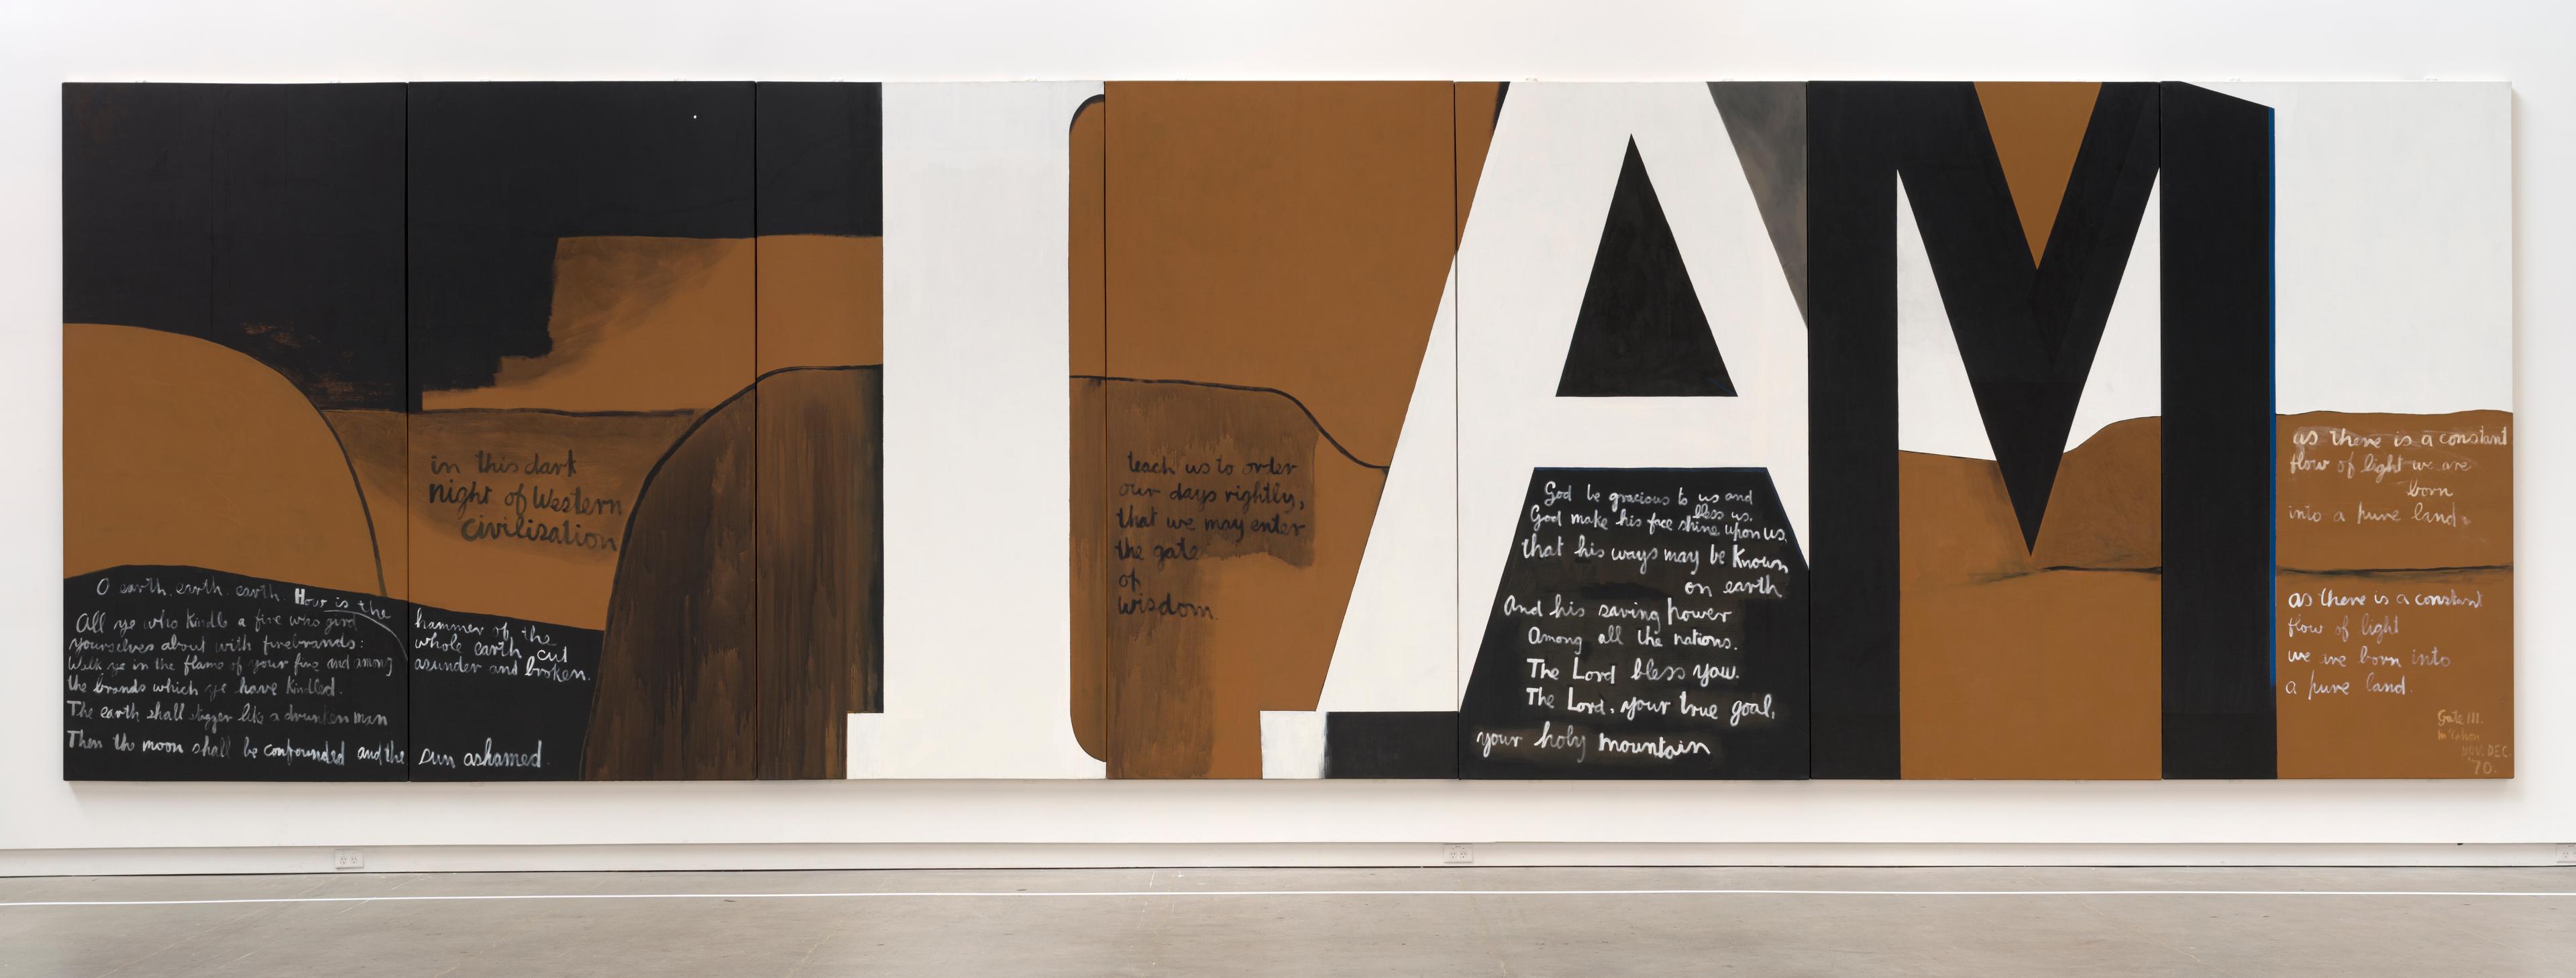 Colin McCahon, Gate III, 1970, acrylic on canvas, Victoria University of Wellington Art Collection, purchased with the assistance of The Queen Elizabeth II Arts Council, 1972